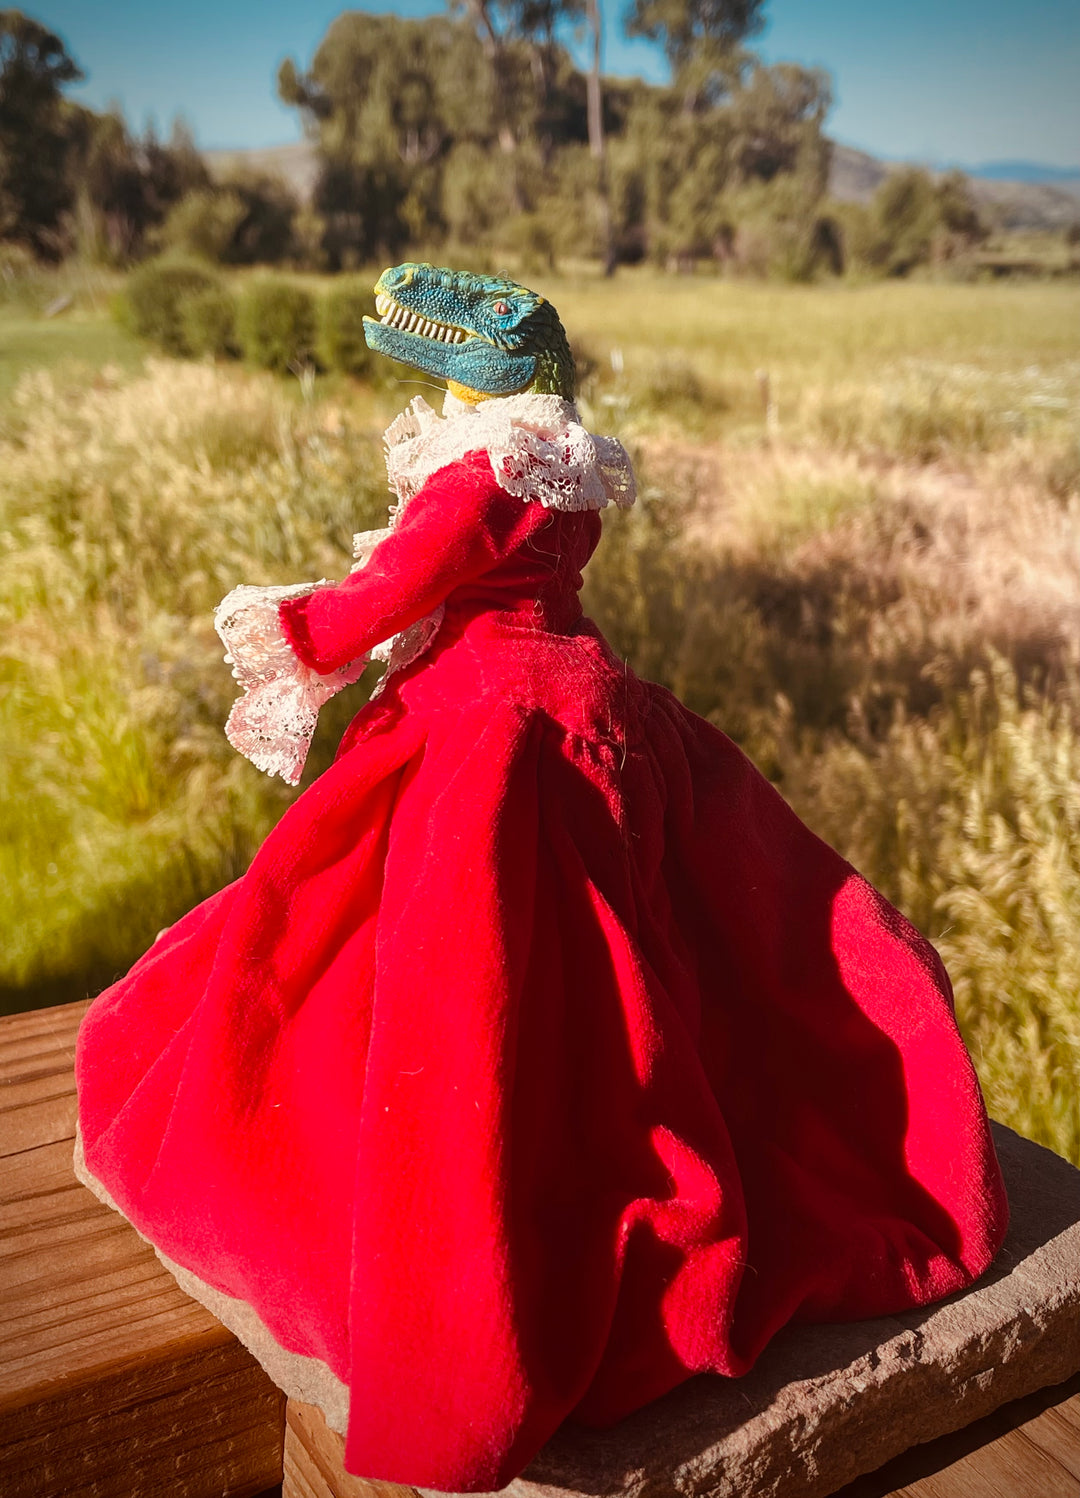 Sideview, Dinosaur head on a vintage plastic doll in pleated red velvet dress with lace trim. 6"tall x 6" wide with skirt